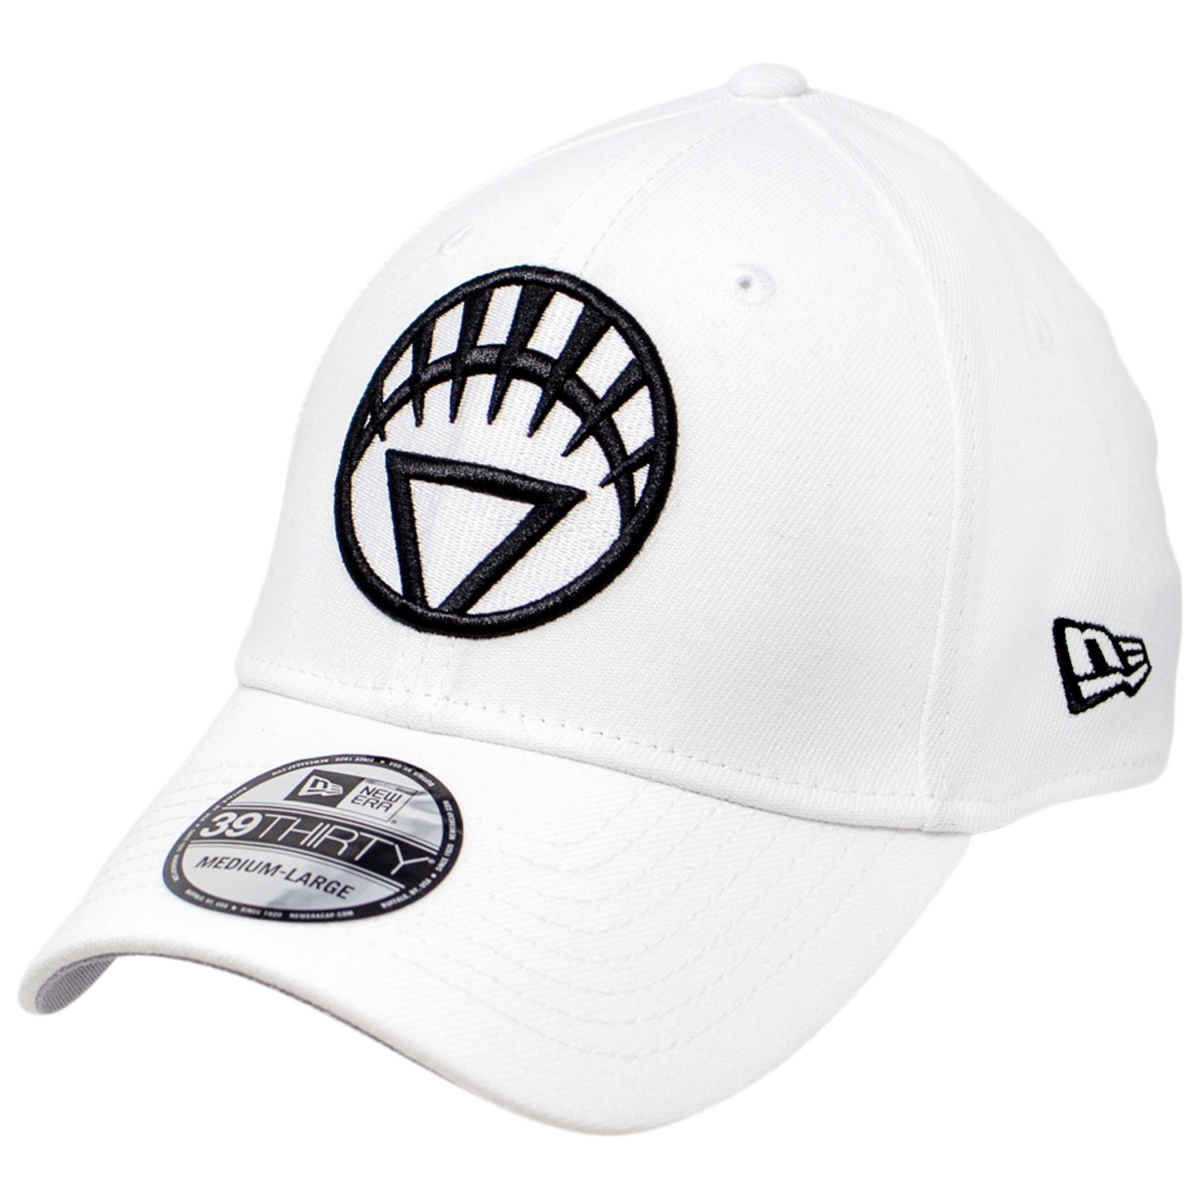 Picture of White Lantern 804144-Small-Medium Color Block New Era 39Thirty Fitted Hat - Small & Medium